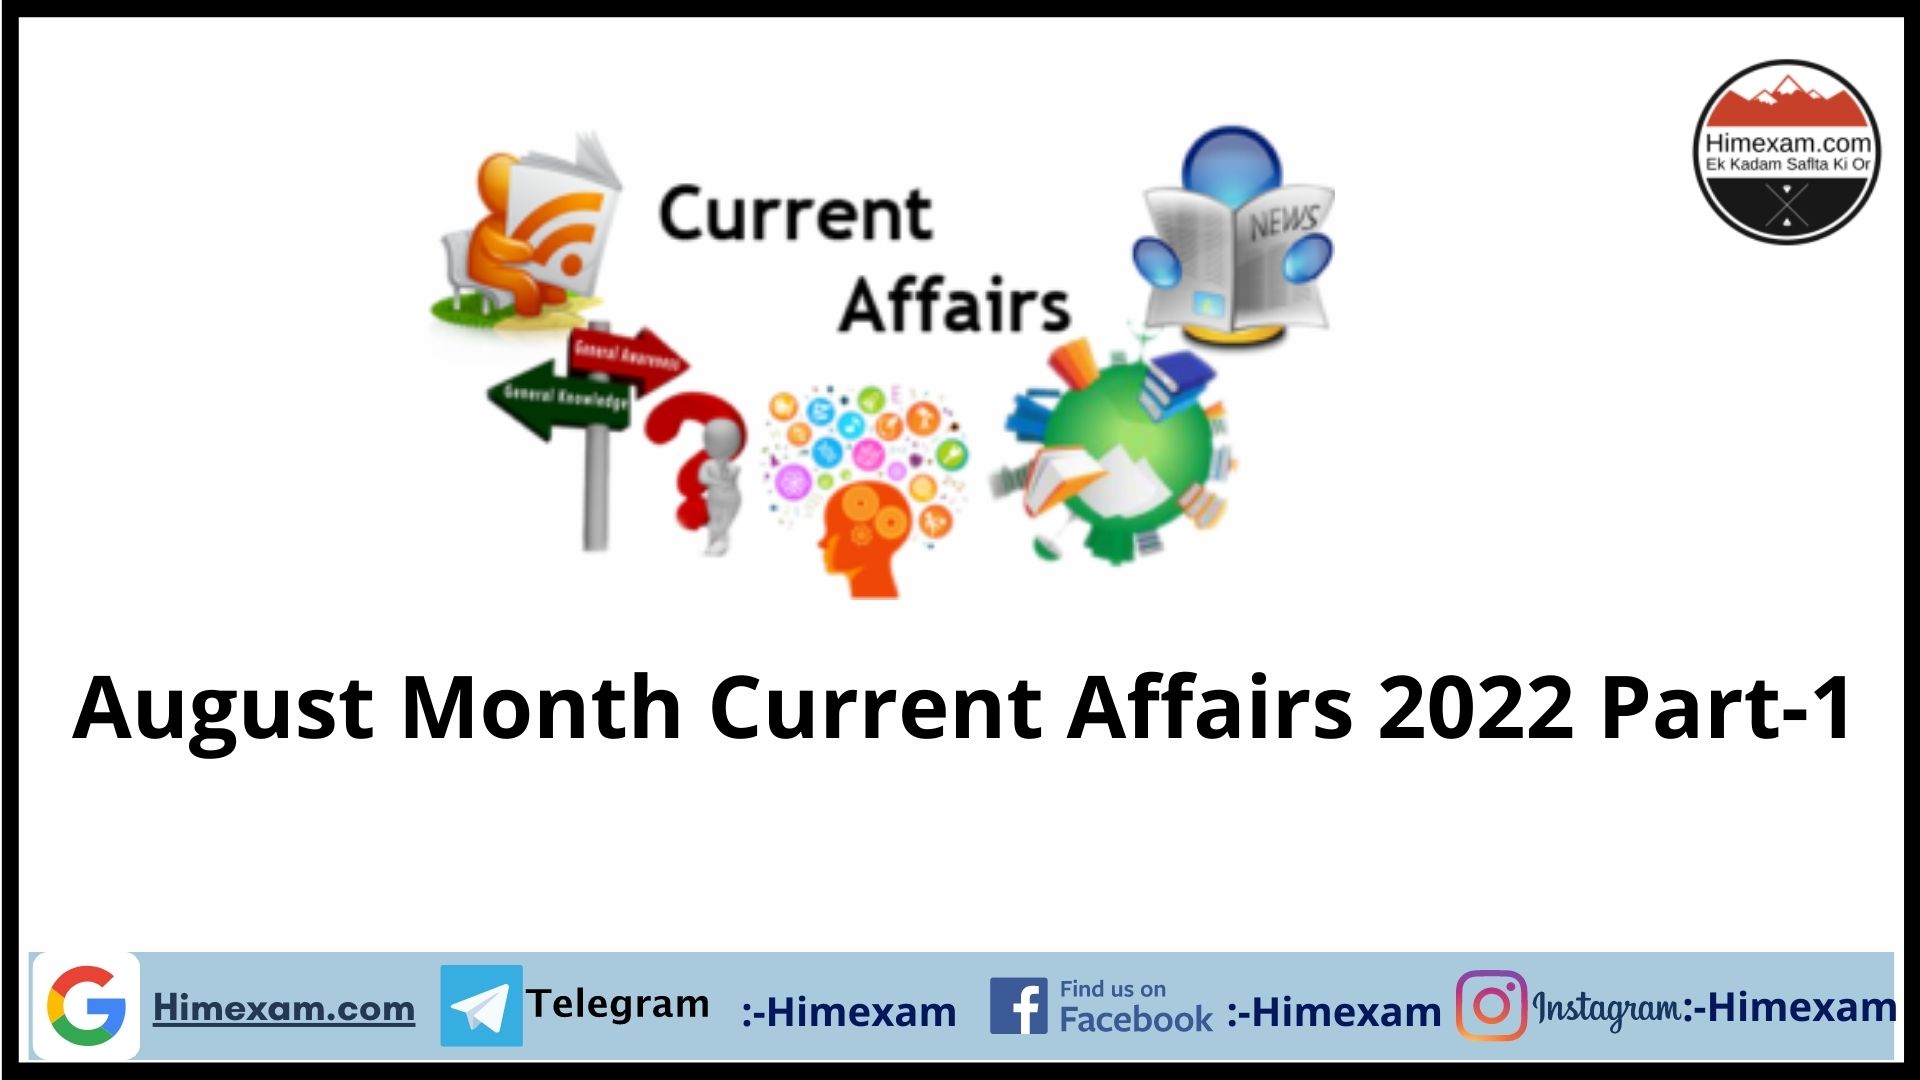 August Month Current Affairs 2022 Part-1